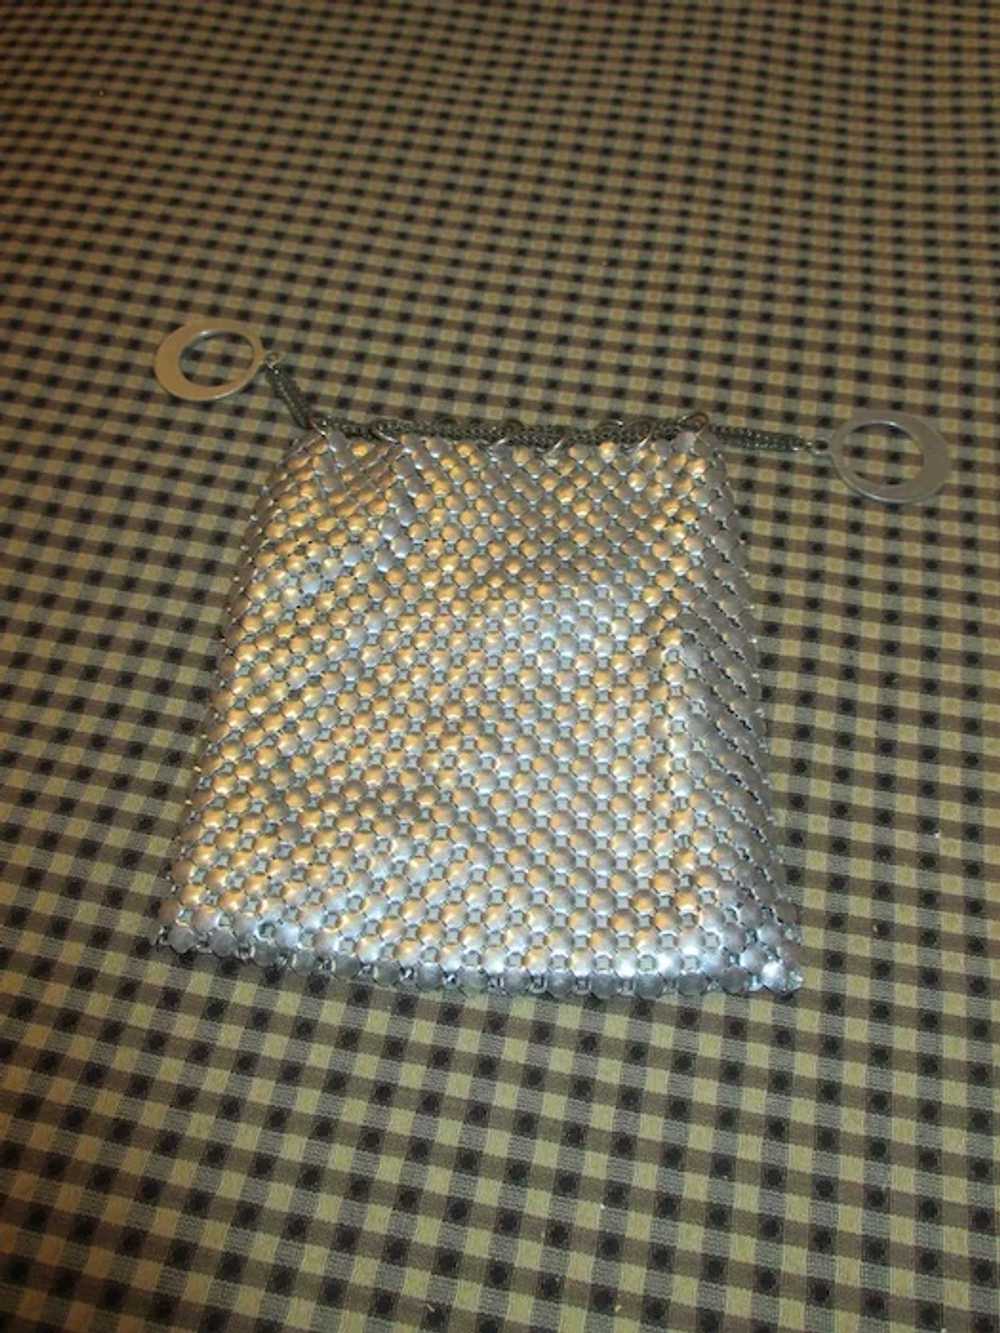 Vintage Chainmail Purse - Very Chic and Pretty - image 2